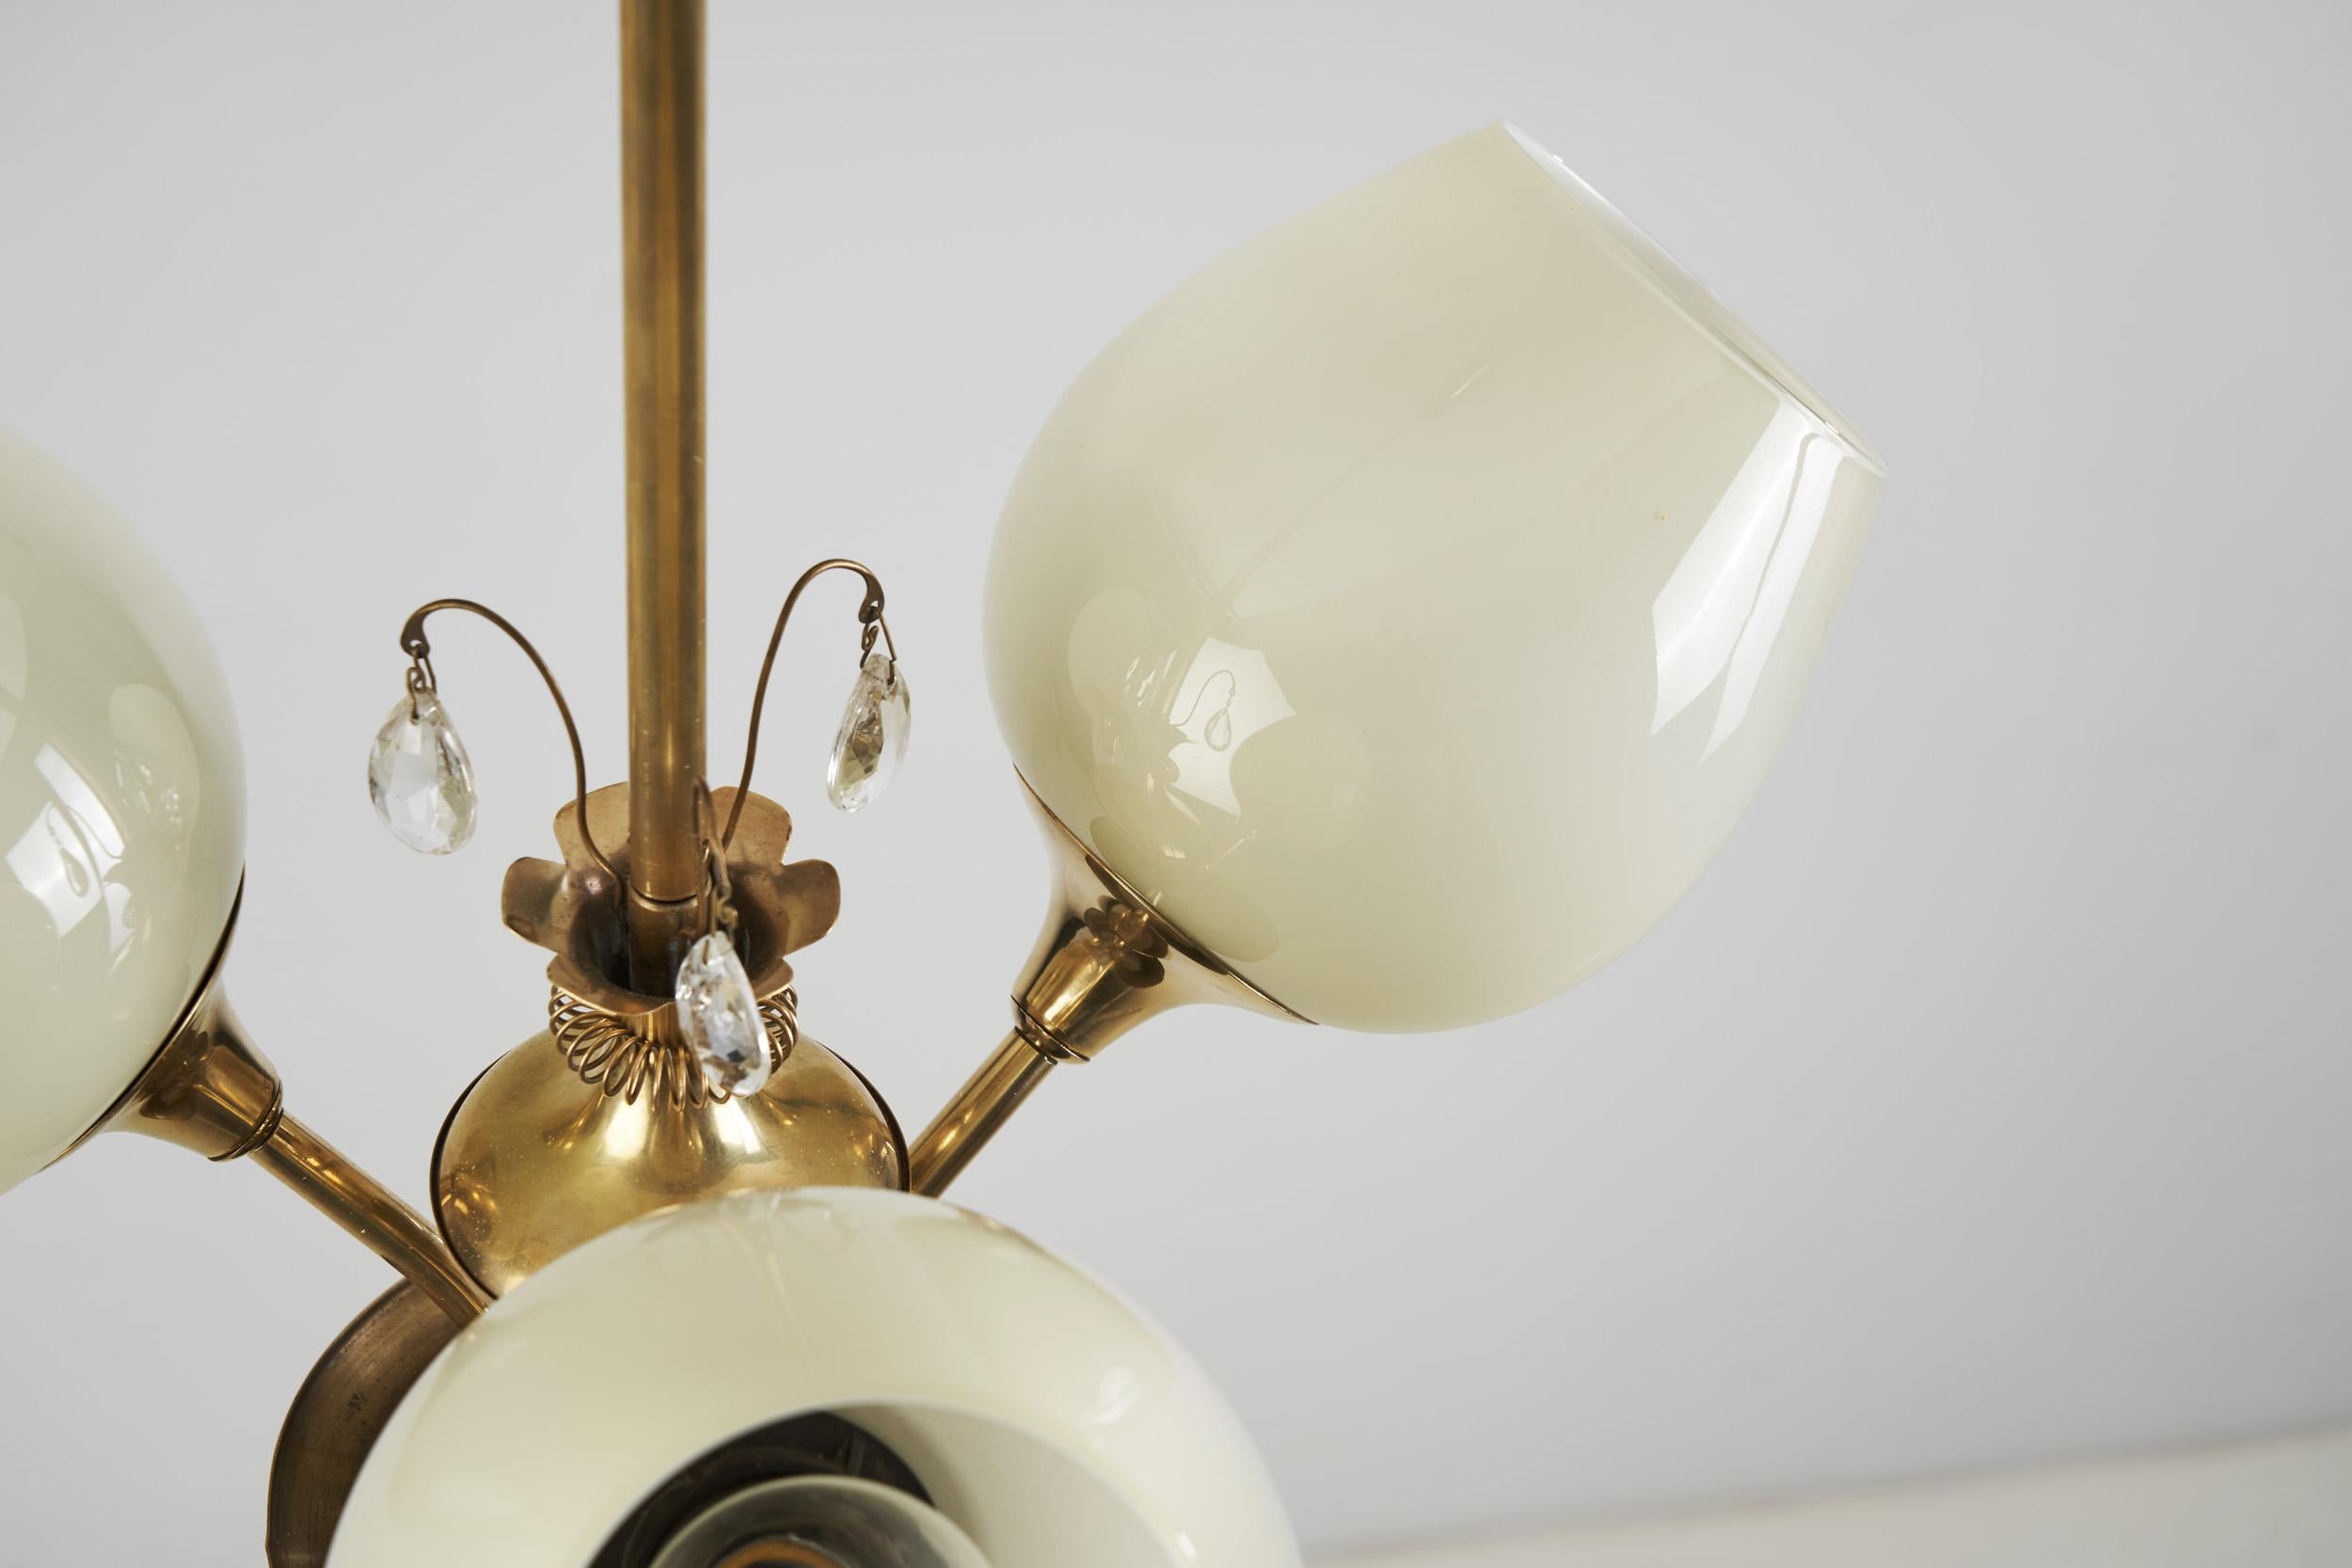 Brass Ceiling Lamp with Opal Shades by Itsu 'Attr.', Finland, ca 1950s For Sale 9